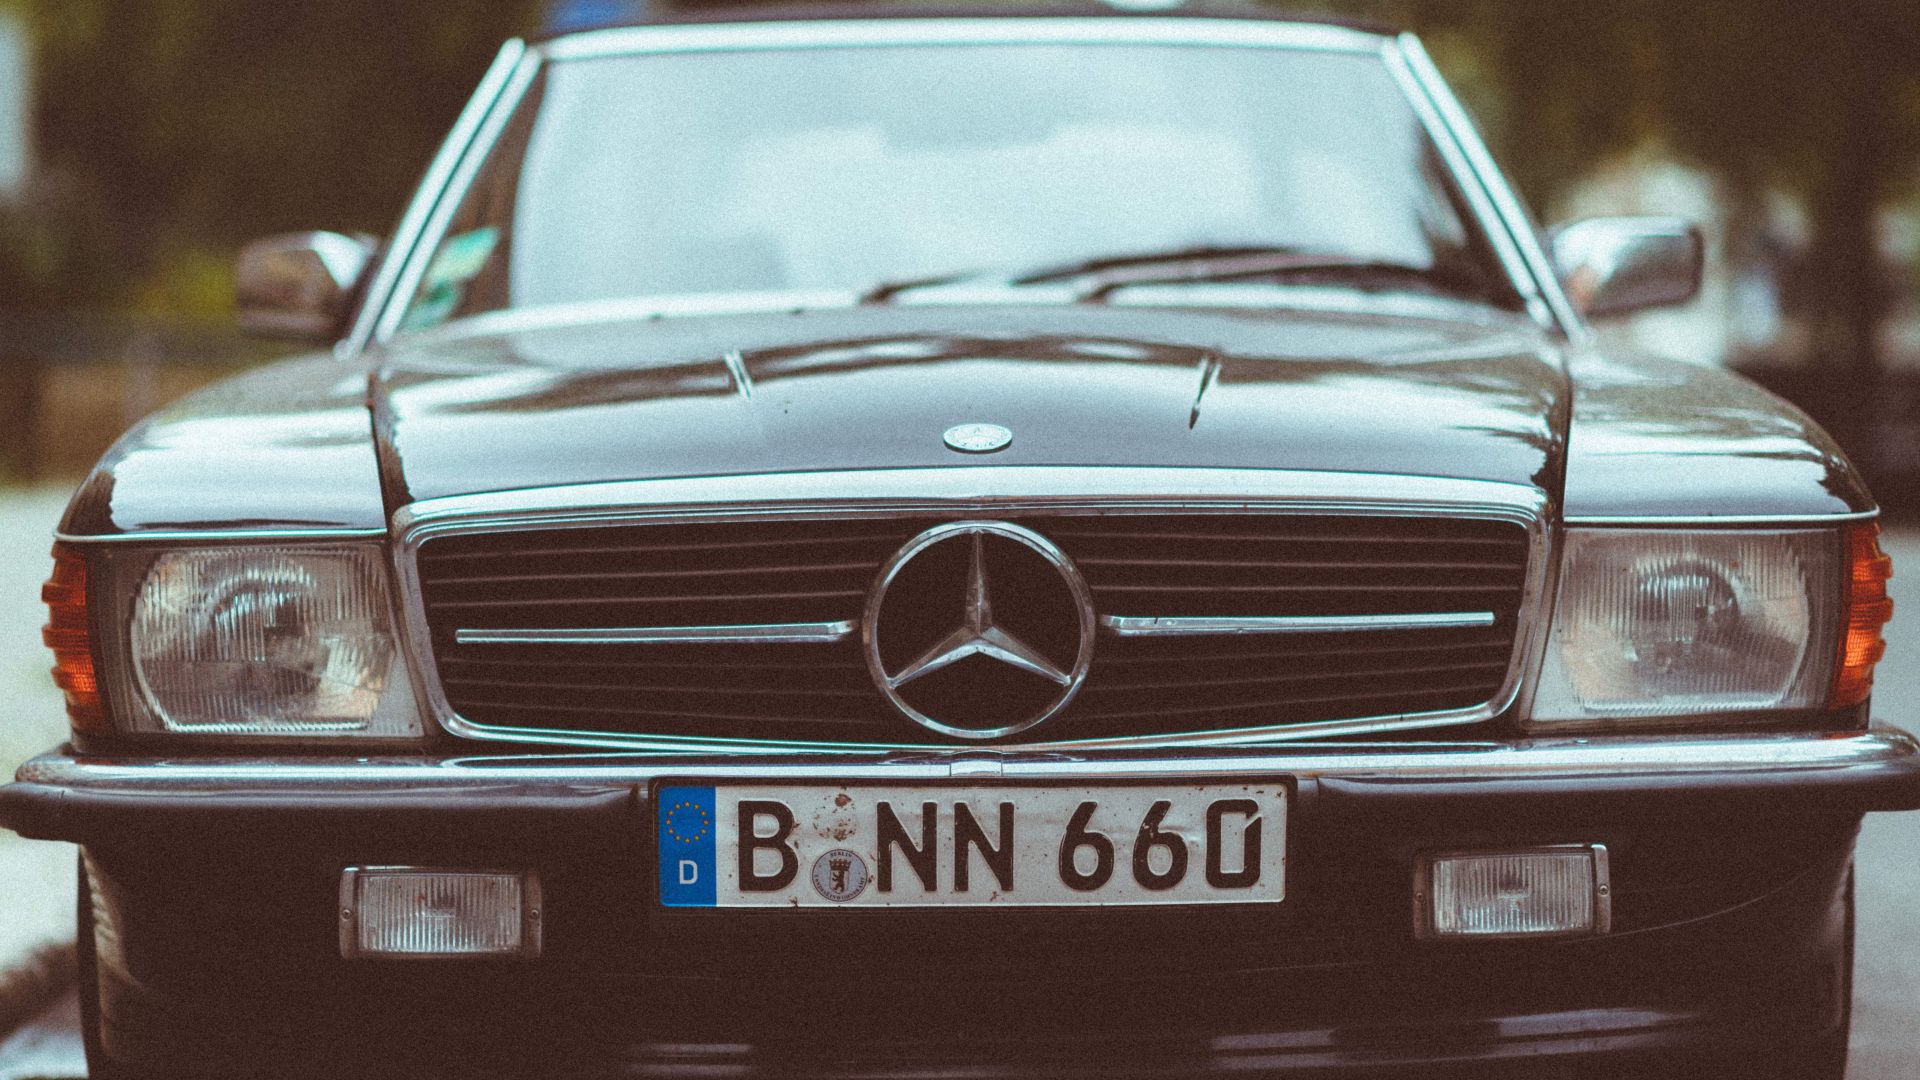 Desktop Wallpaper Mercedes Benz, Old, Classic Car, Front View, Hd Image,  Picture, Background, A8e21b